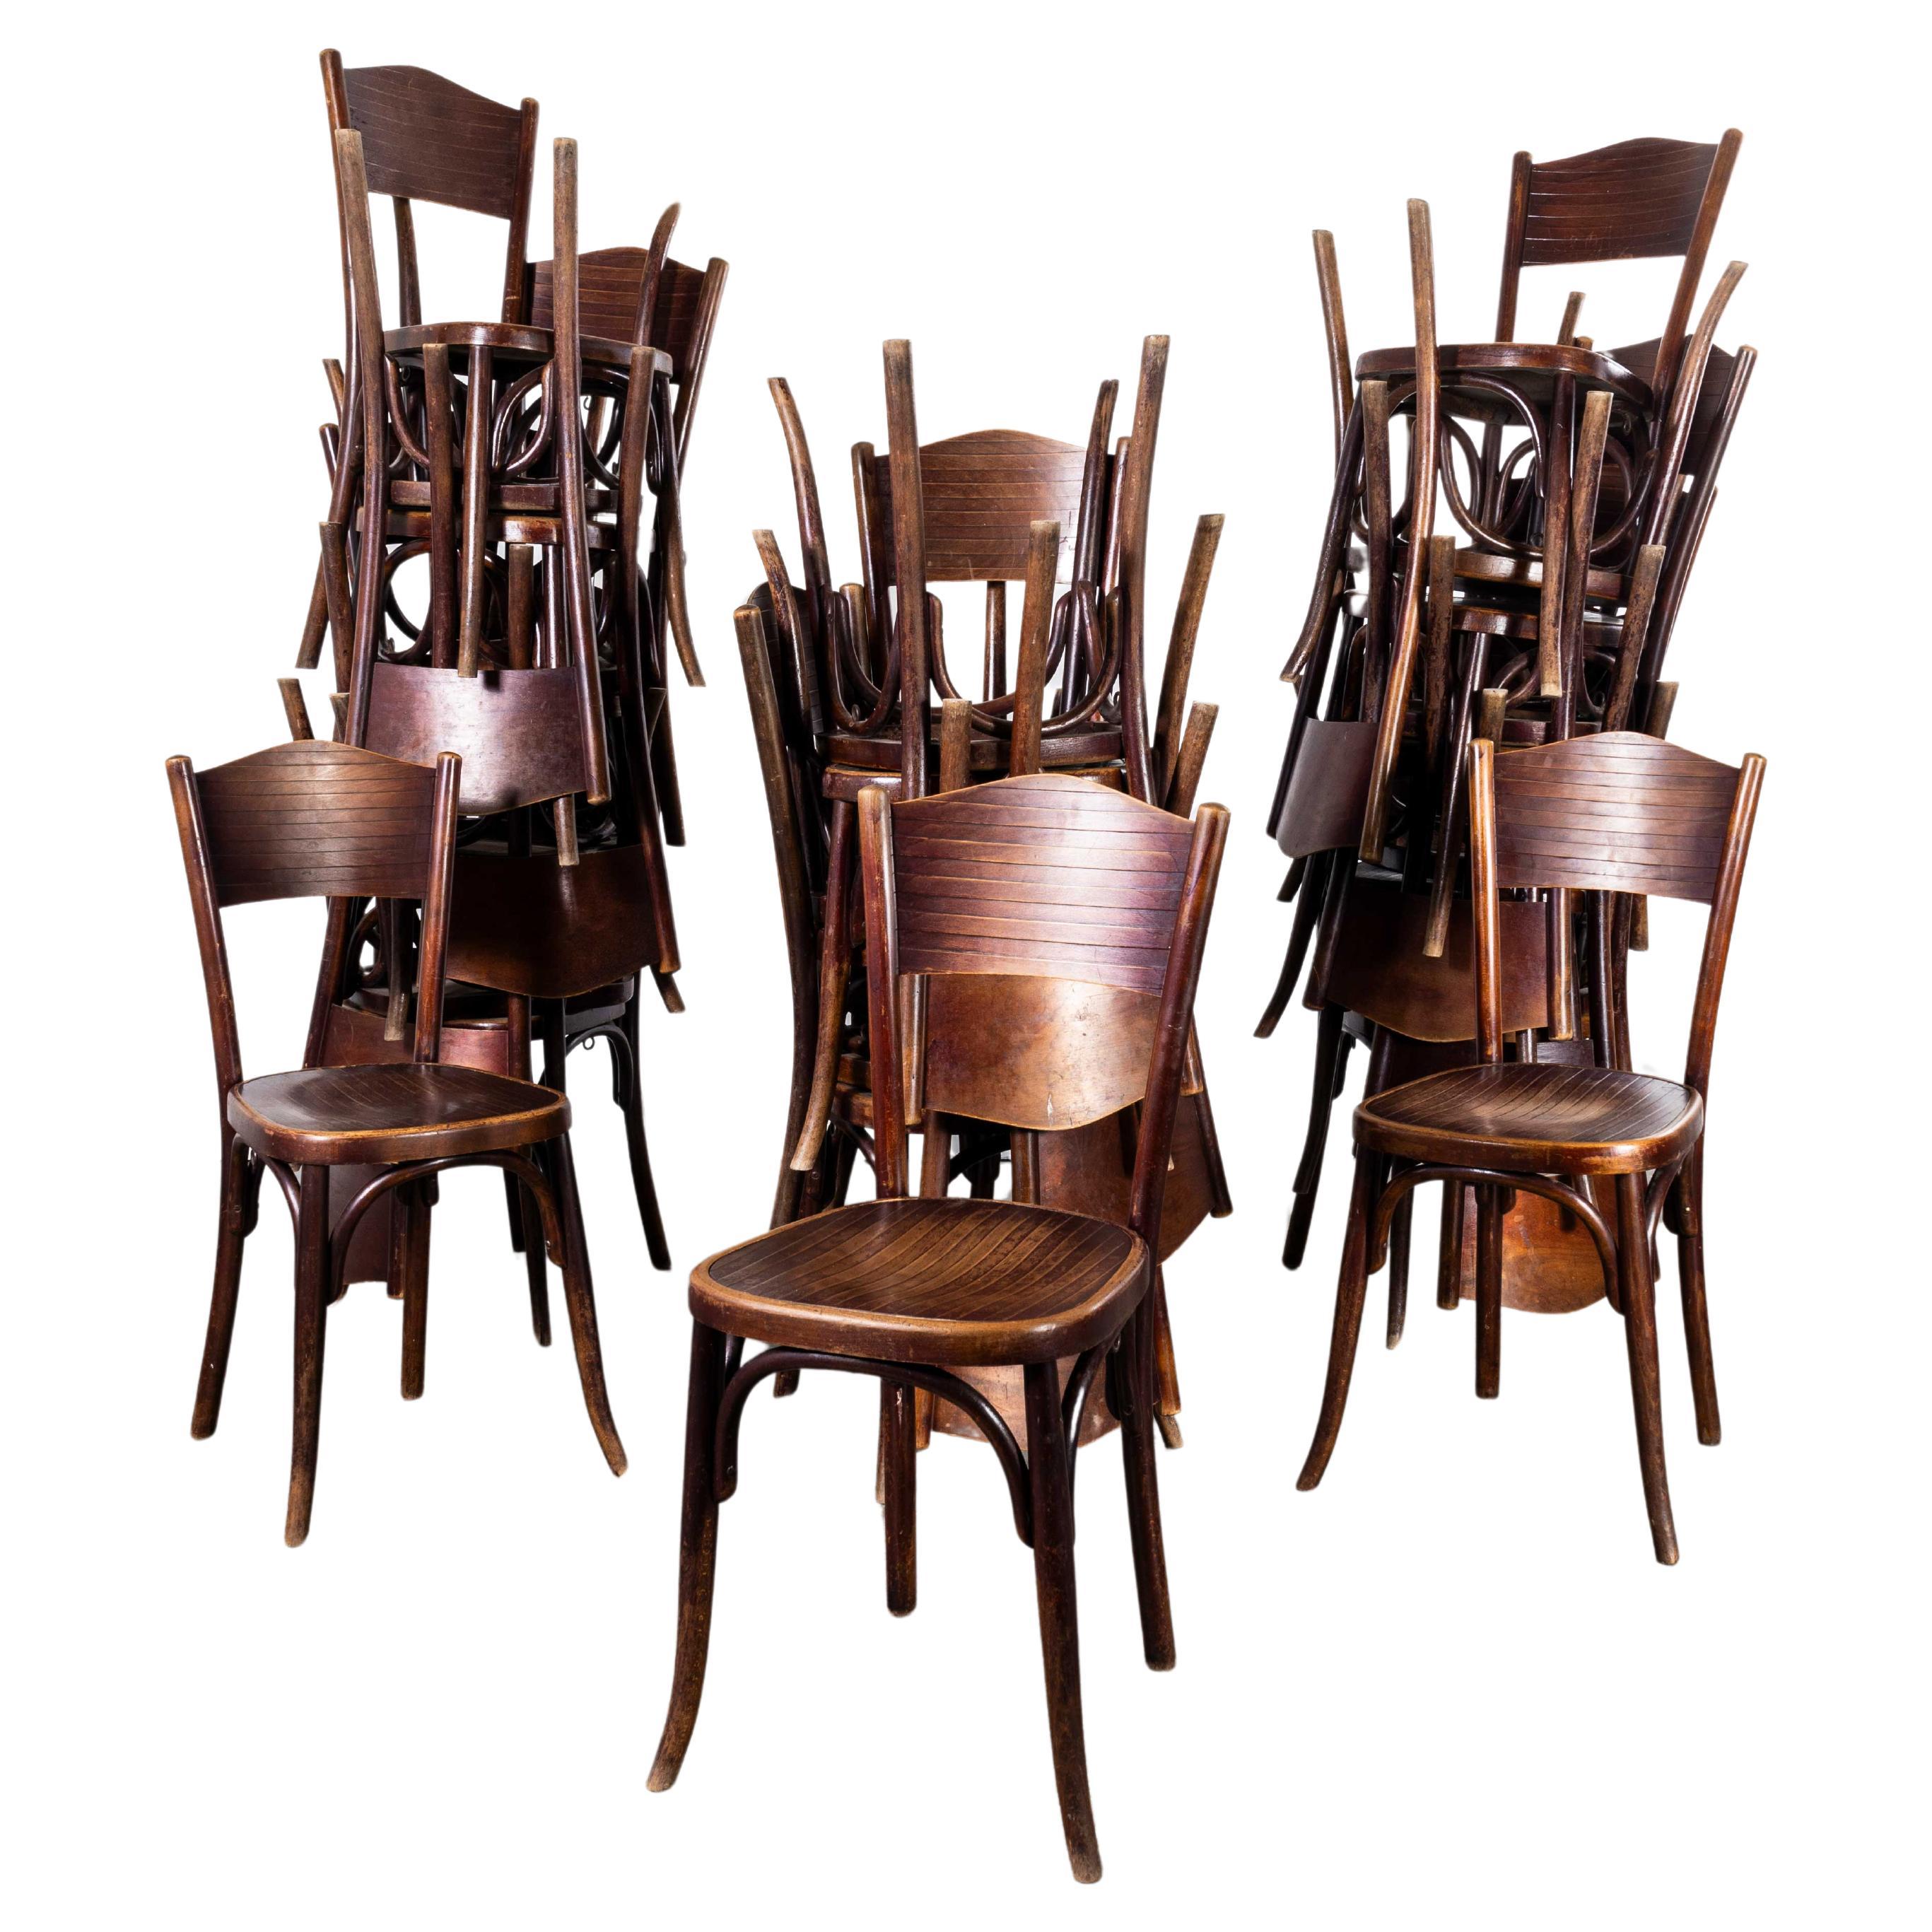 1940's Fischel Stamped Bentwood Dining Chairs - Good Quantity Available For Sale